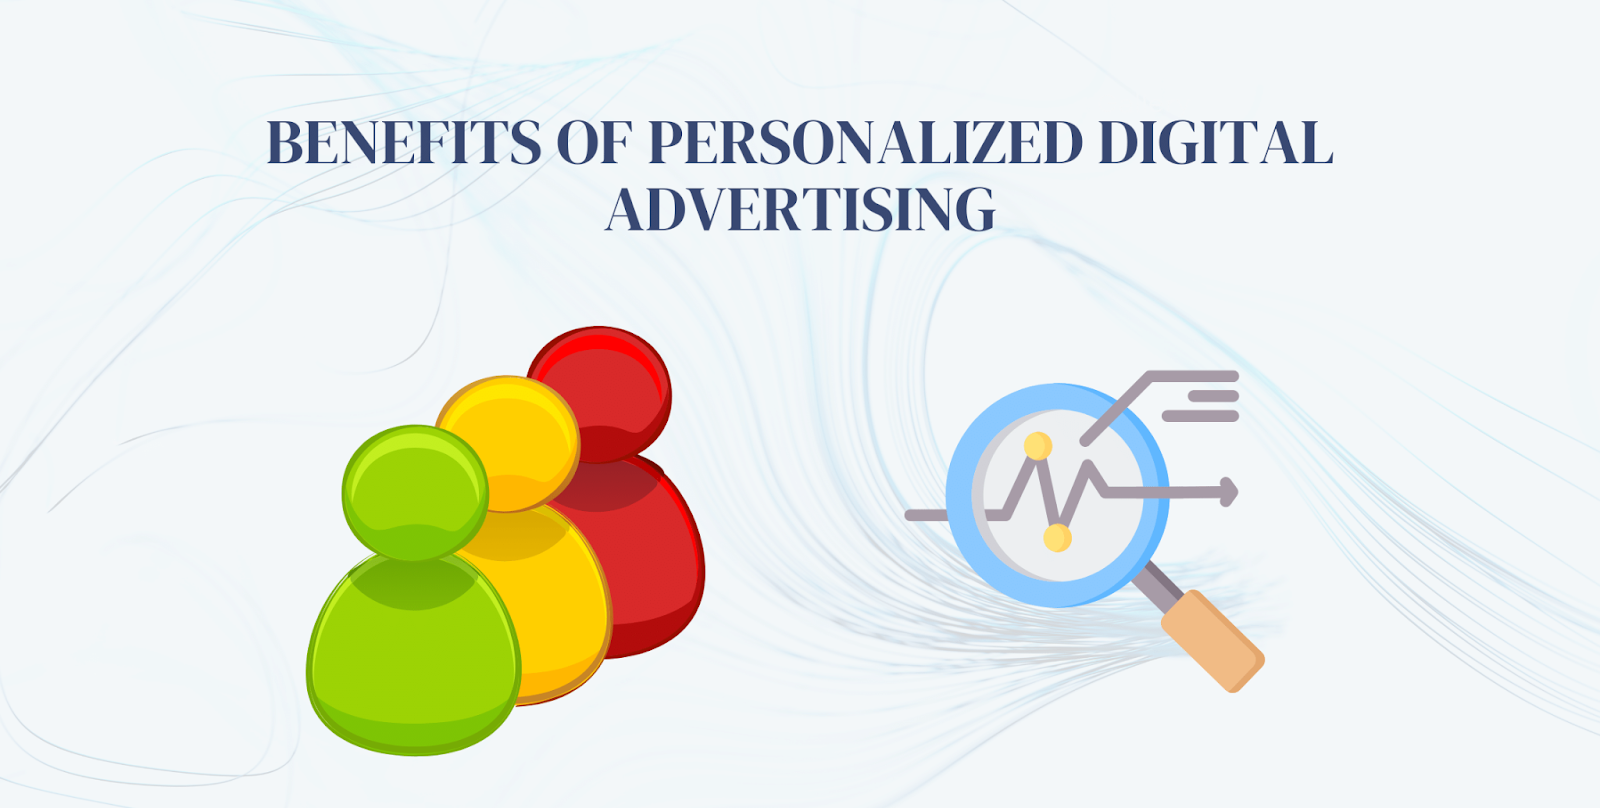 Benefits of Personalized Digital Advertising: